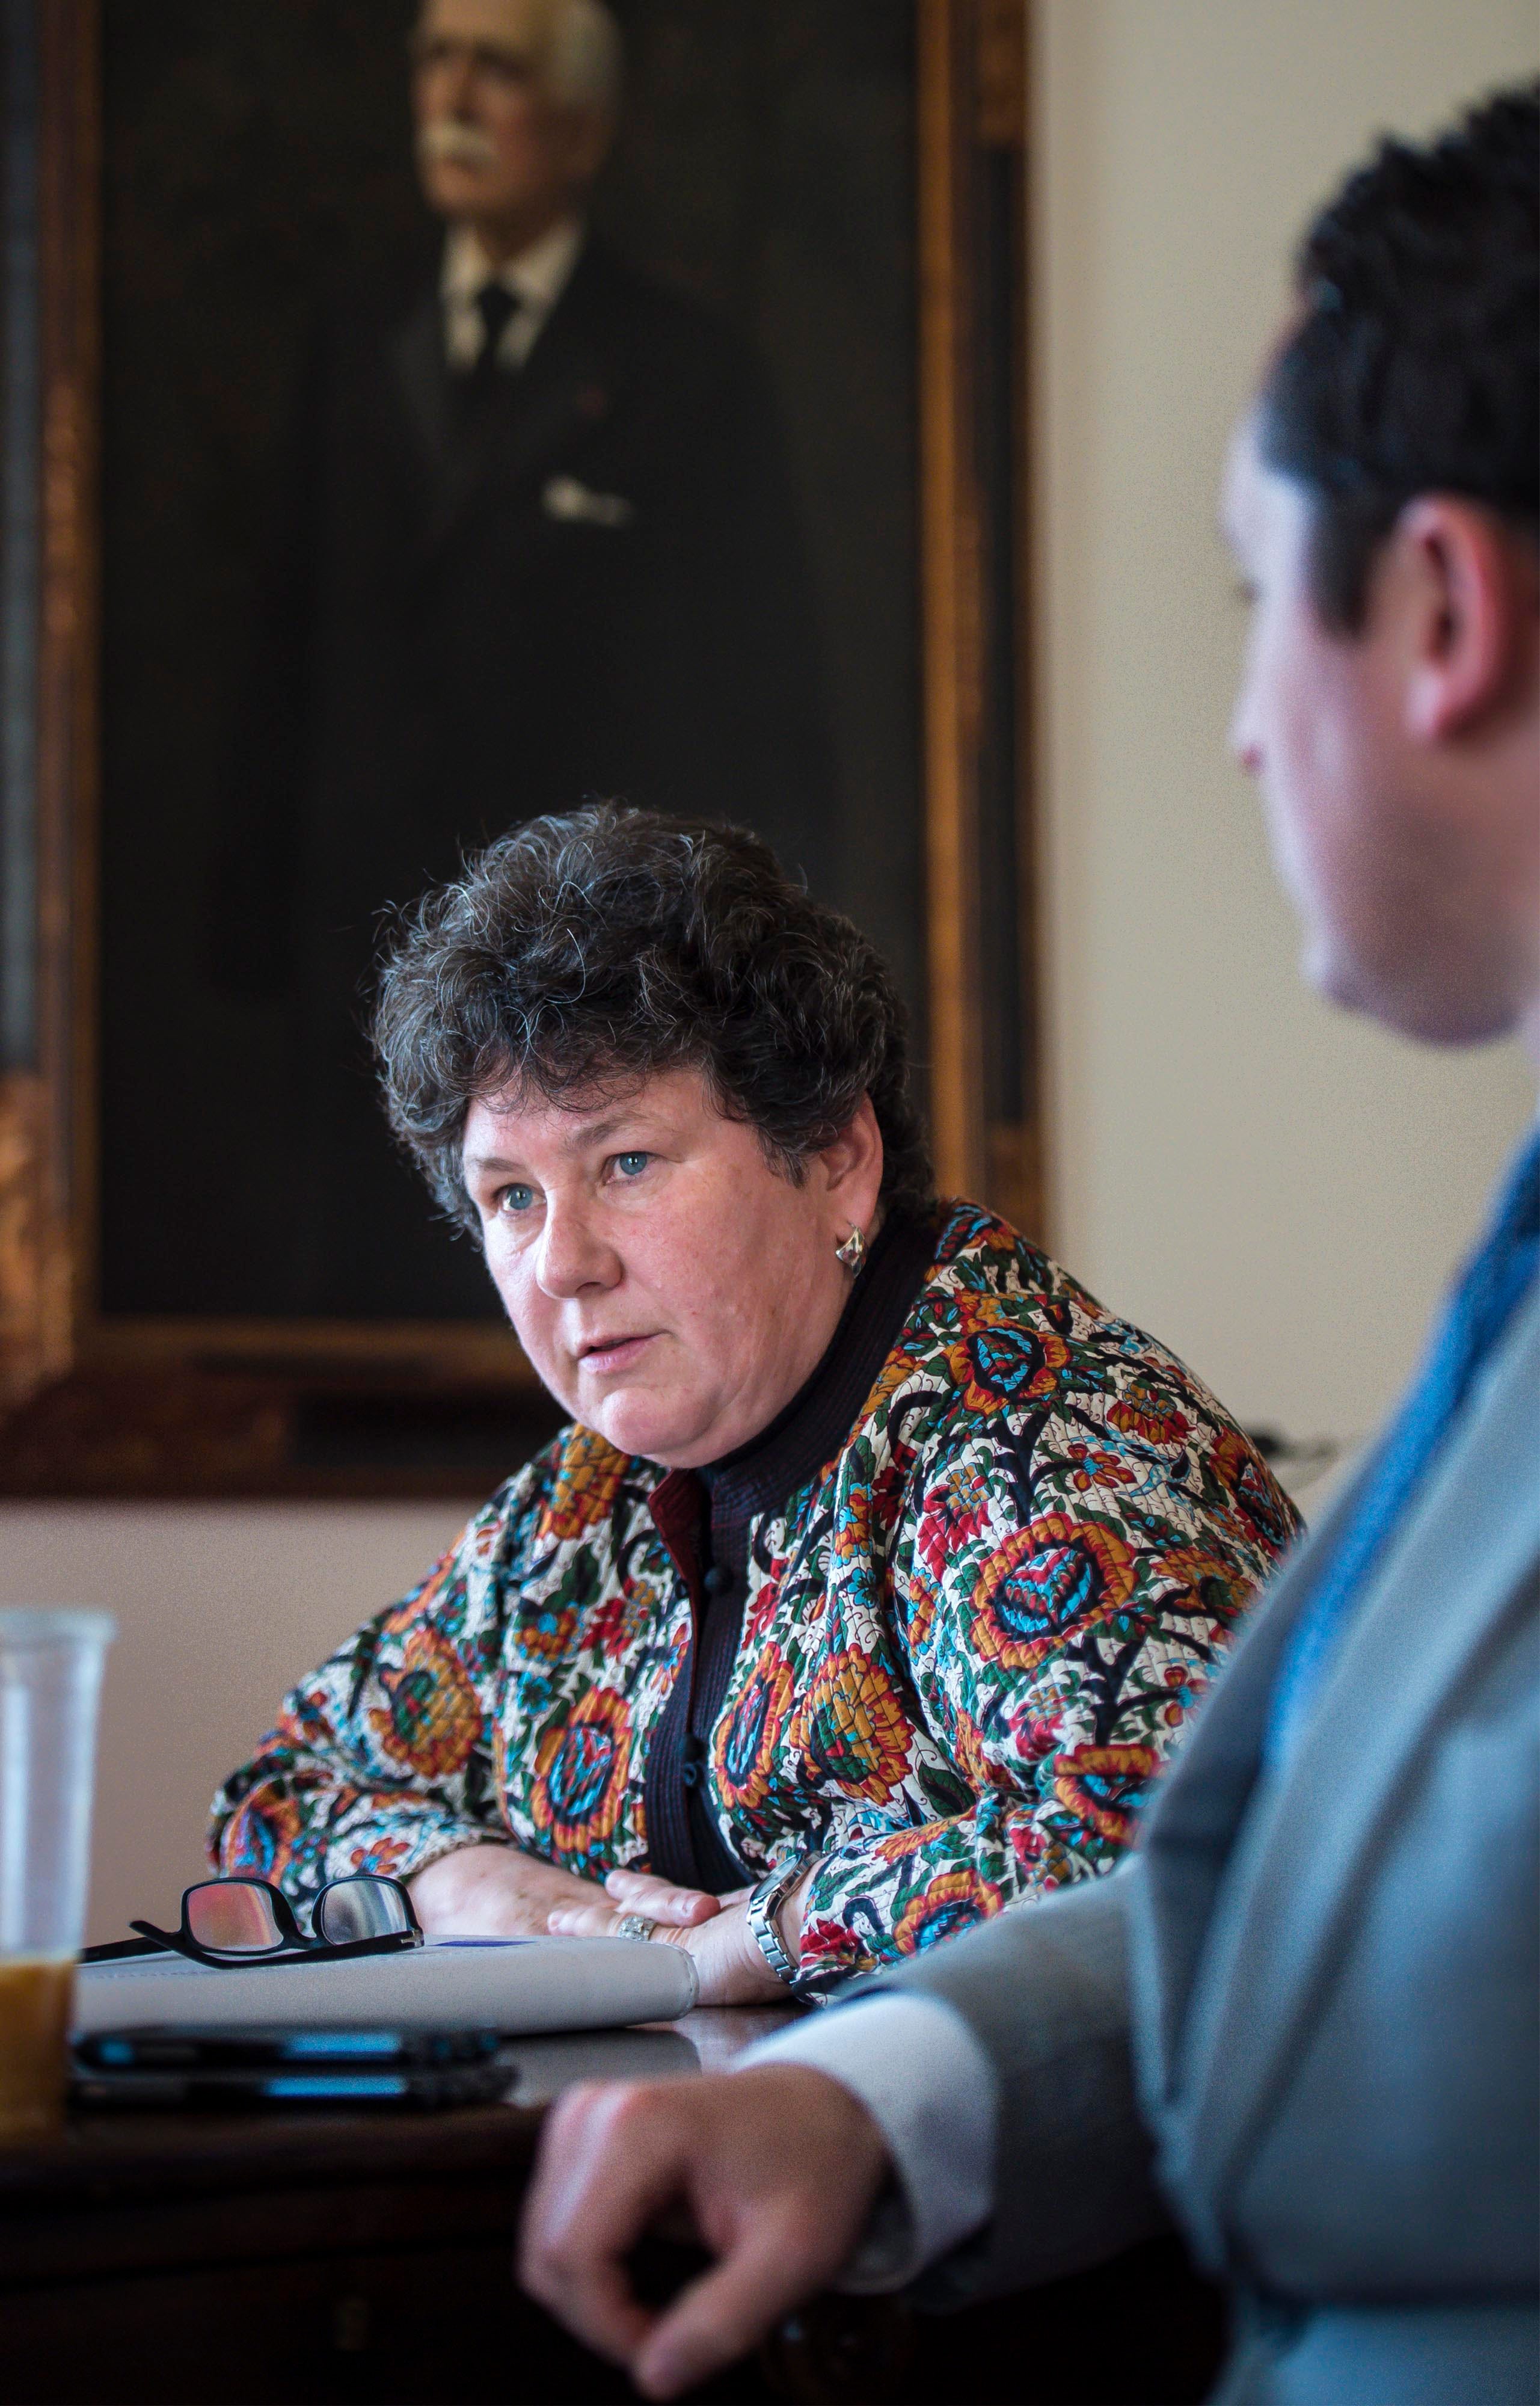 Susan Donegan, the commissioner of the Department of Financial Regulation, discusses the Shumlin administration's oversight of the EB-5 program during an interview at the Statehouse in Montpelier on Wednesday, April 20, 2016.